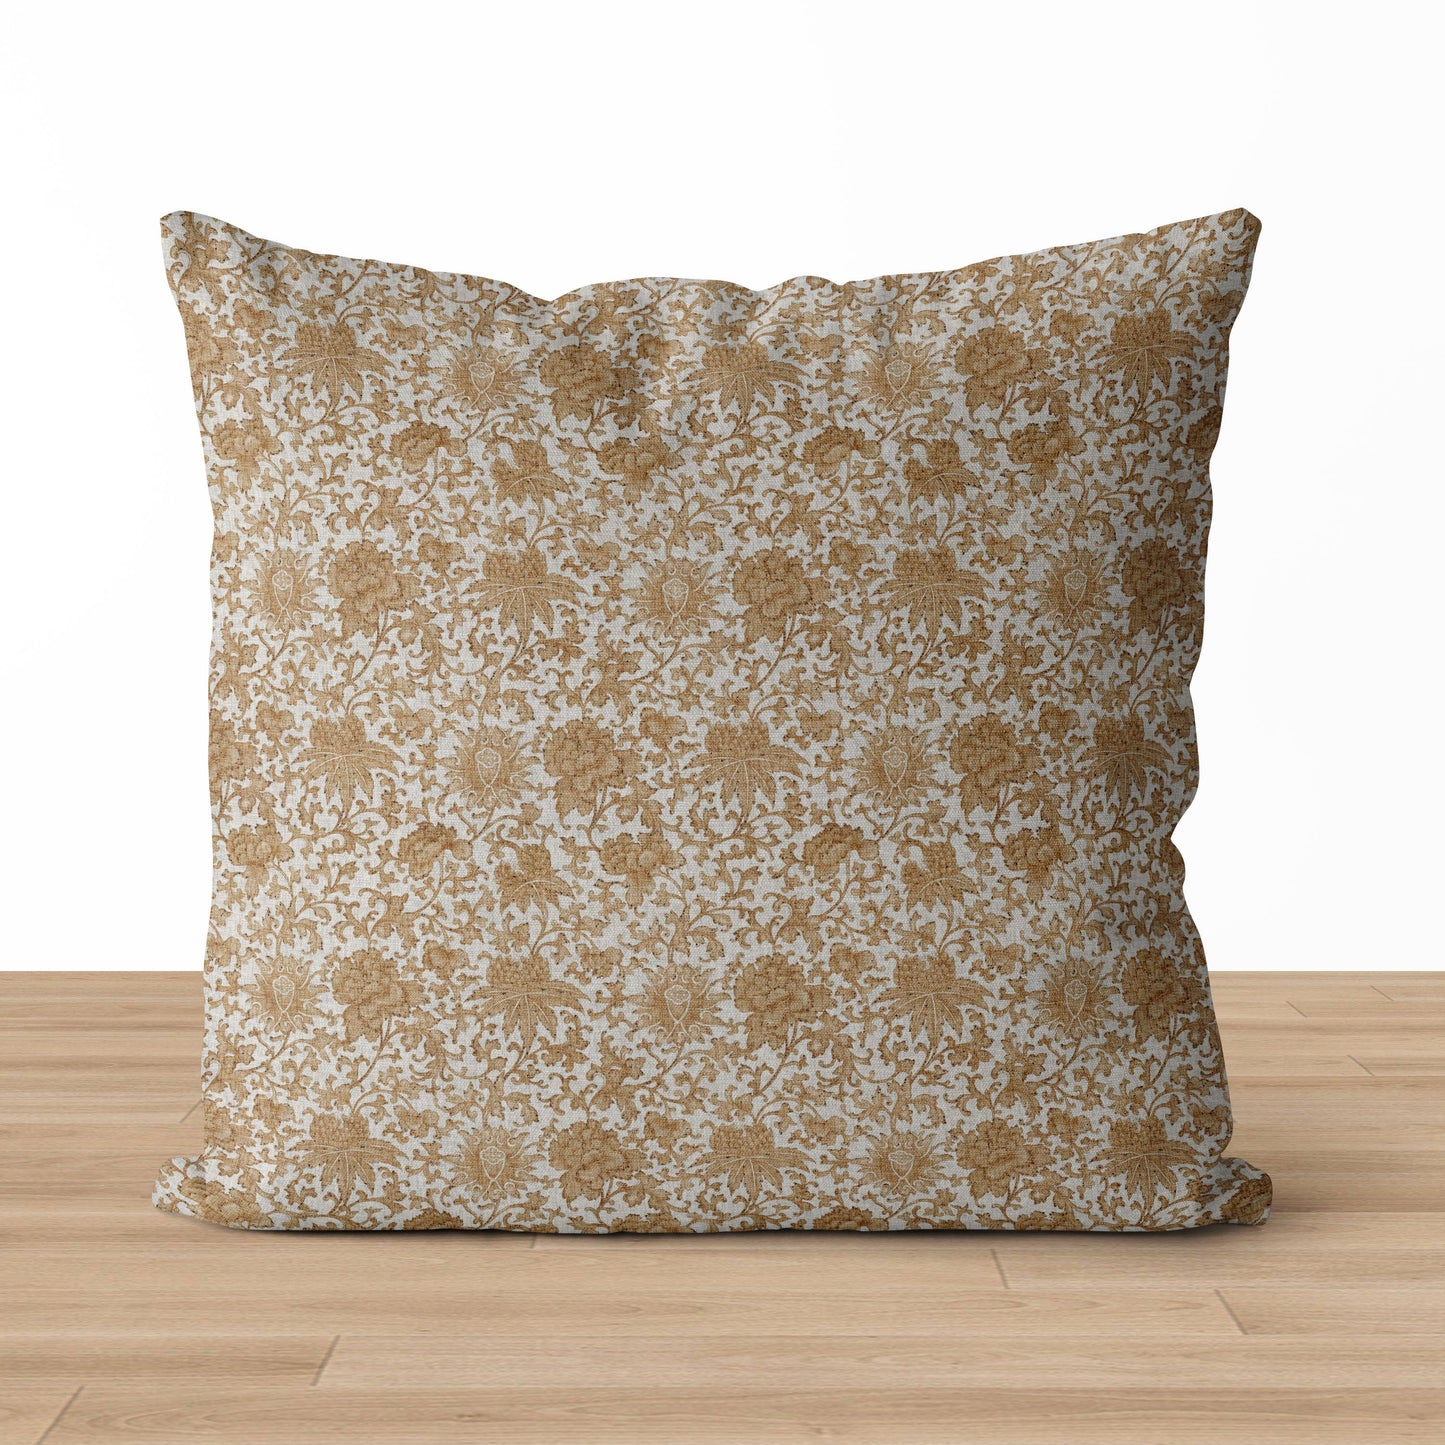 Timeless Blooms I Vintage Floral Pillow Cover | Throw Pillow: 18" x 18" / Printed Back